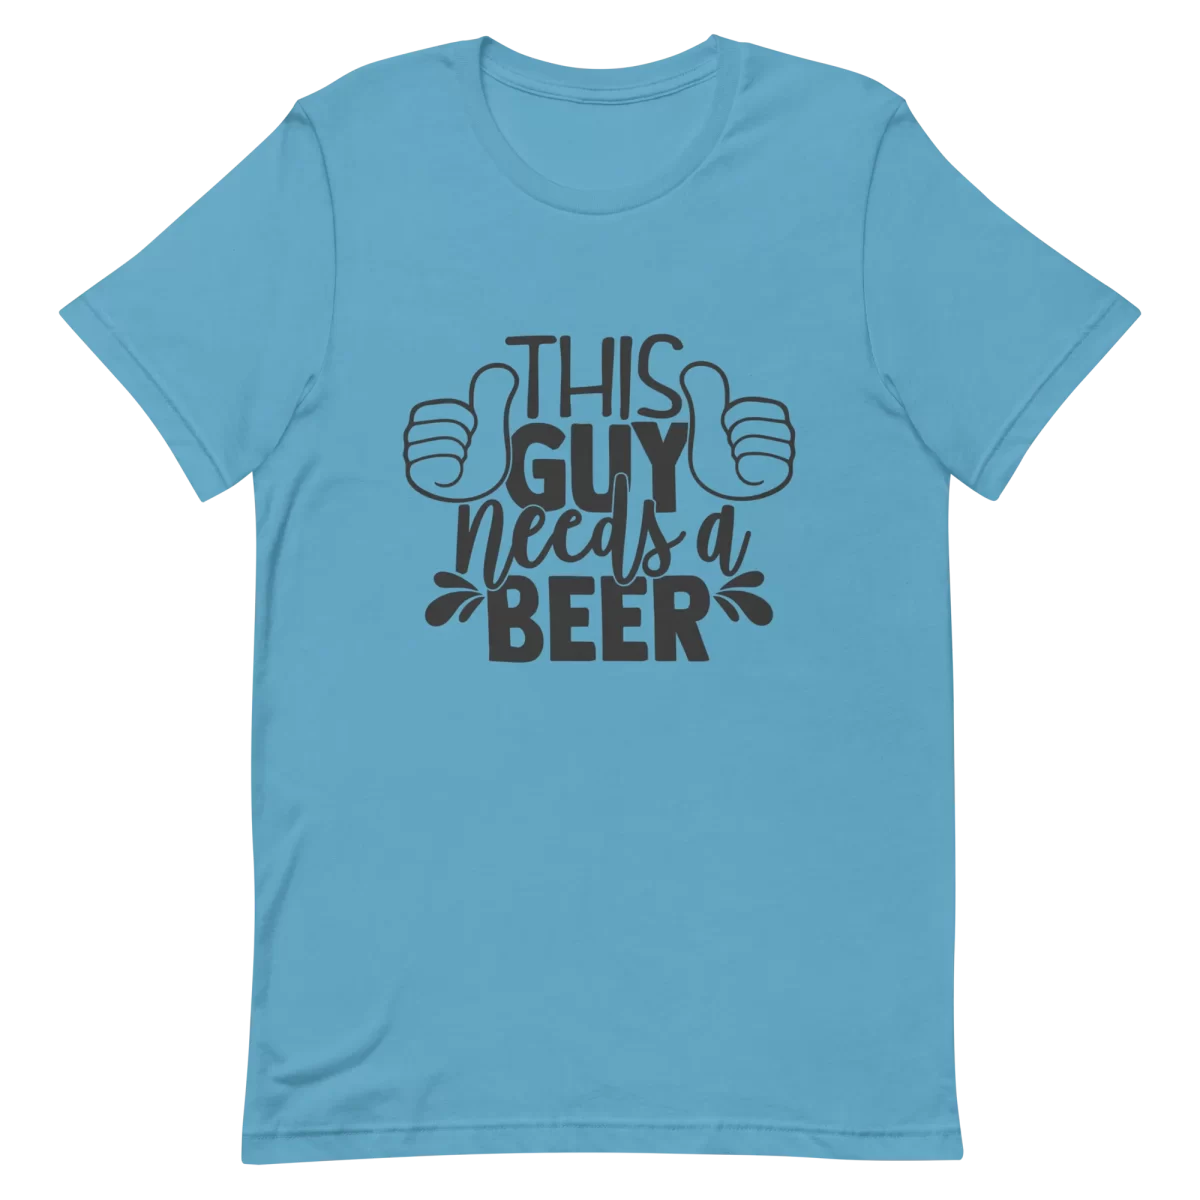 Unisex T-Shirt - This Guy Needs a Beer - Ocean Blue